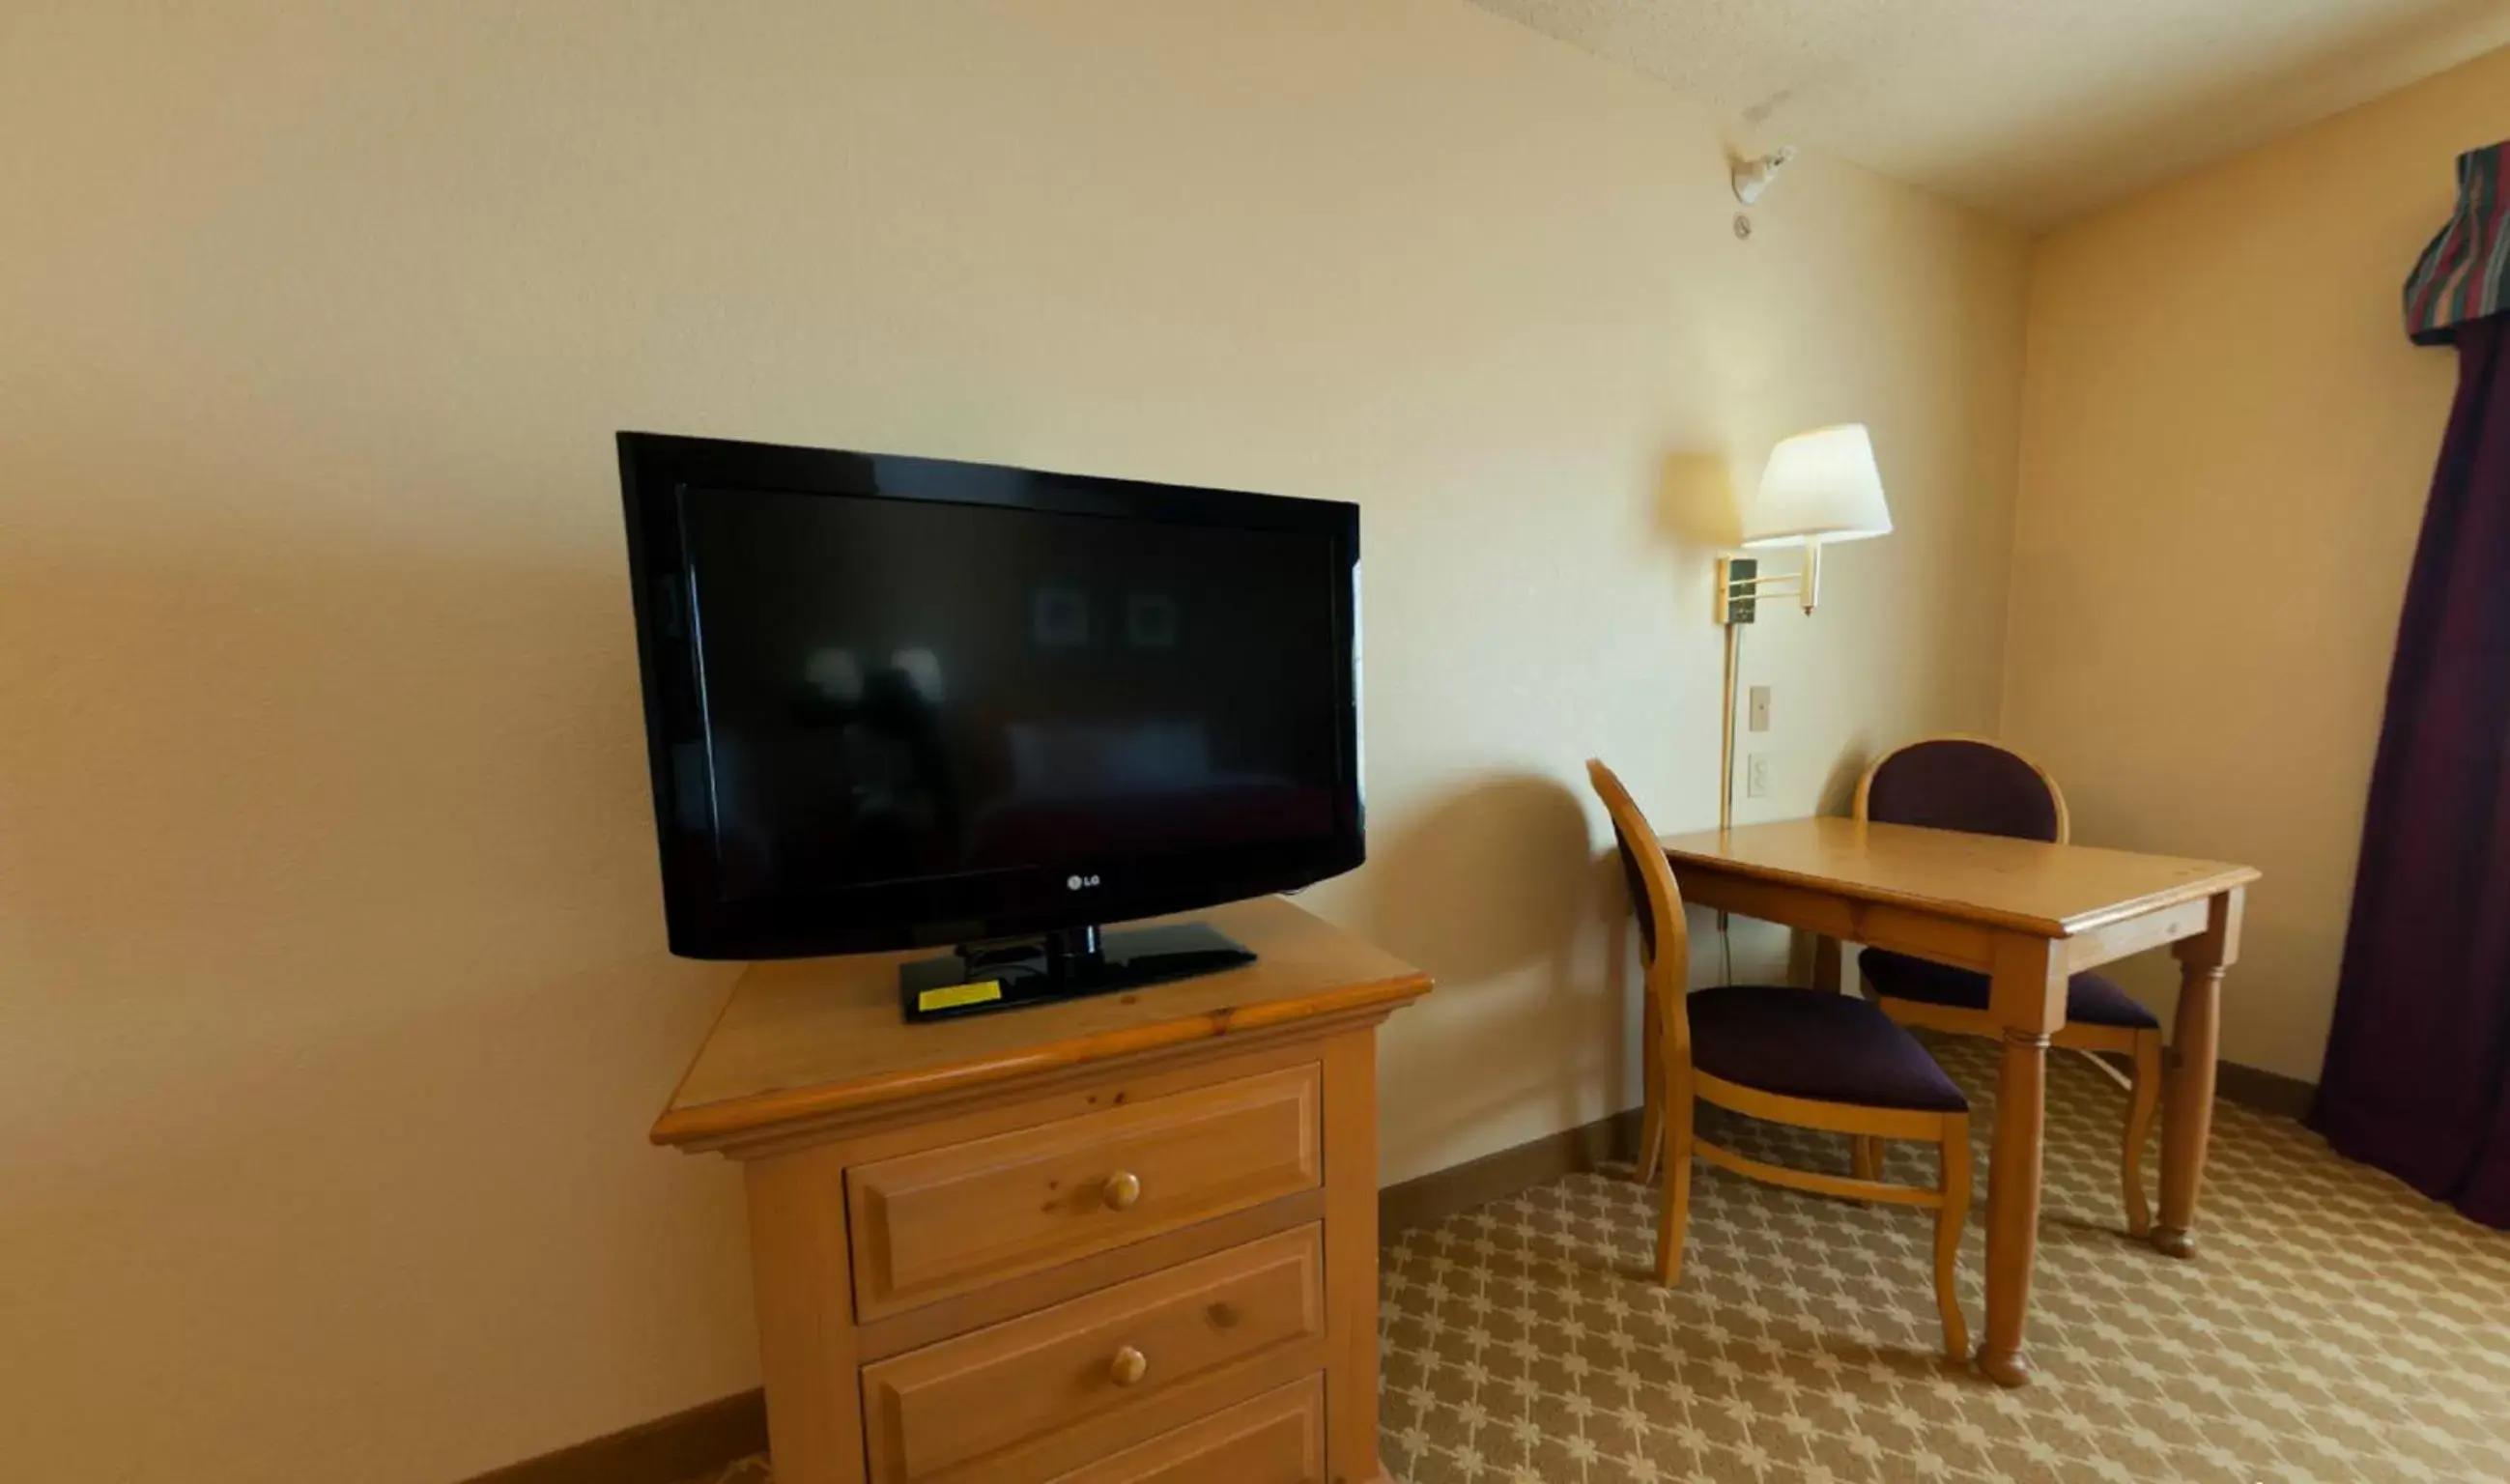 Family, TV/Entertainment Center in AmericInn by Wyndham, Galesburg, IL